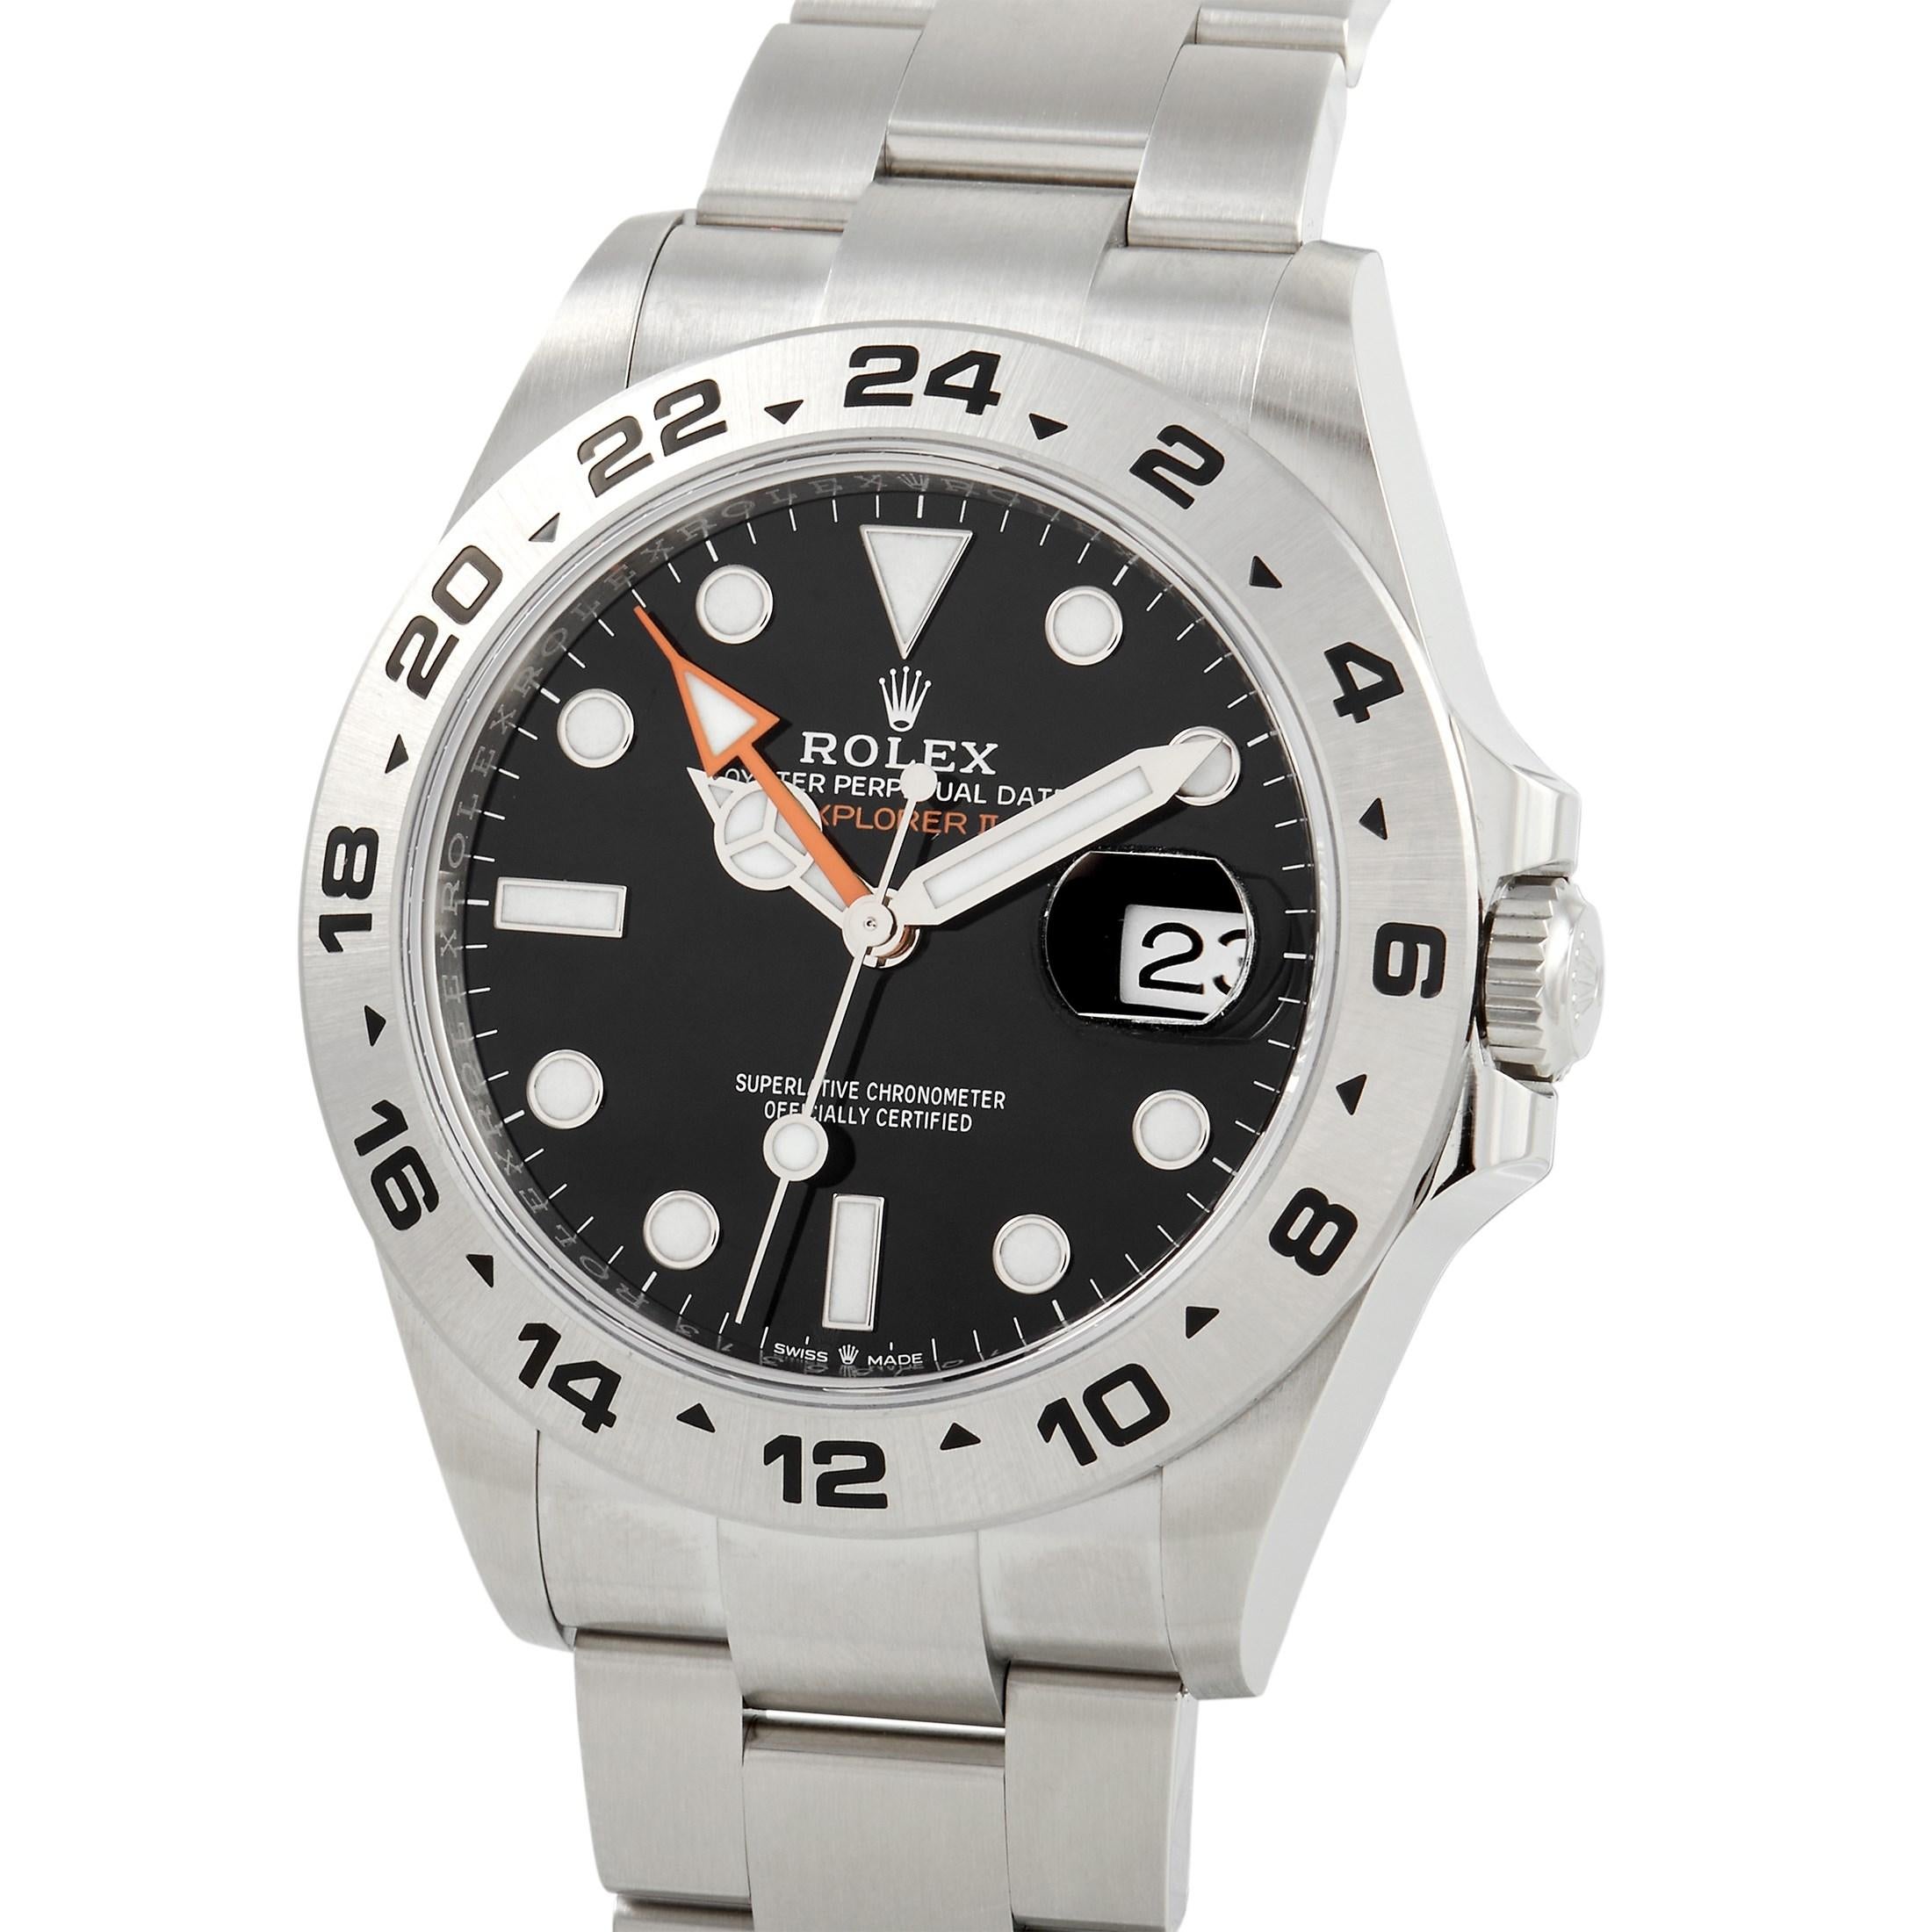 The Rolex Explorer II Watch, reference number 226570, is a striking timepiece that proves the luxury brand isn’t a stranger to contemporary design. 

The most eye-catching part of this elegant watch is its bold black dial, which is set within a 42mm